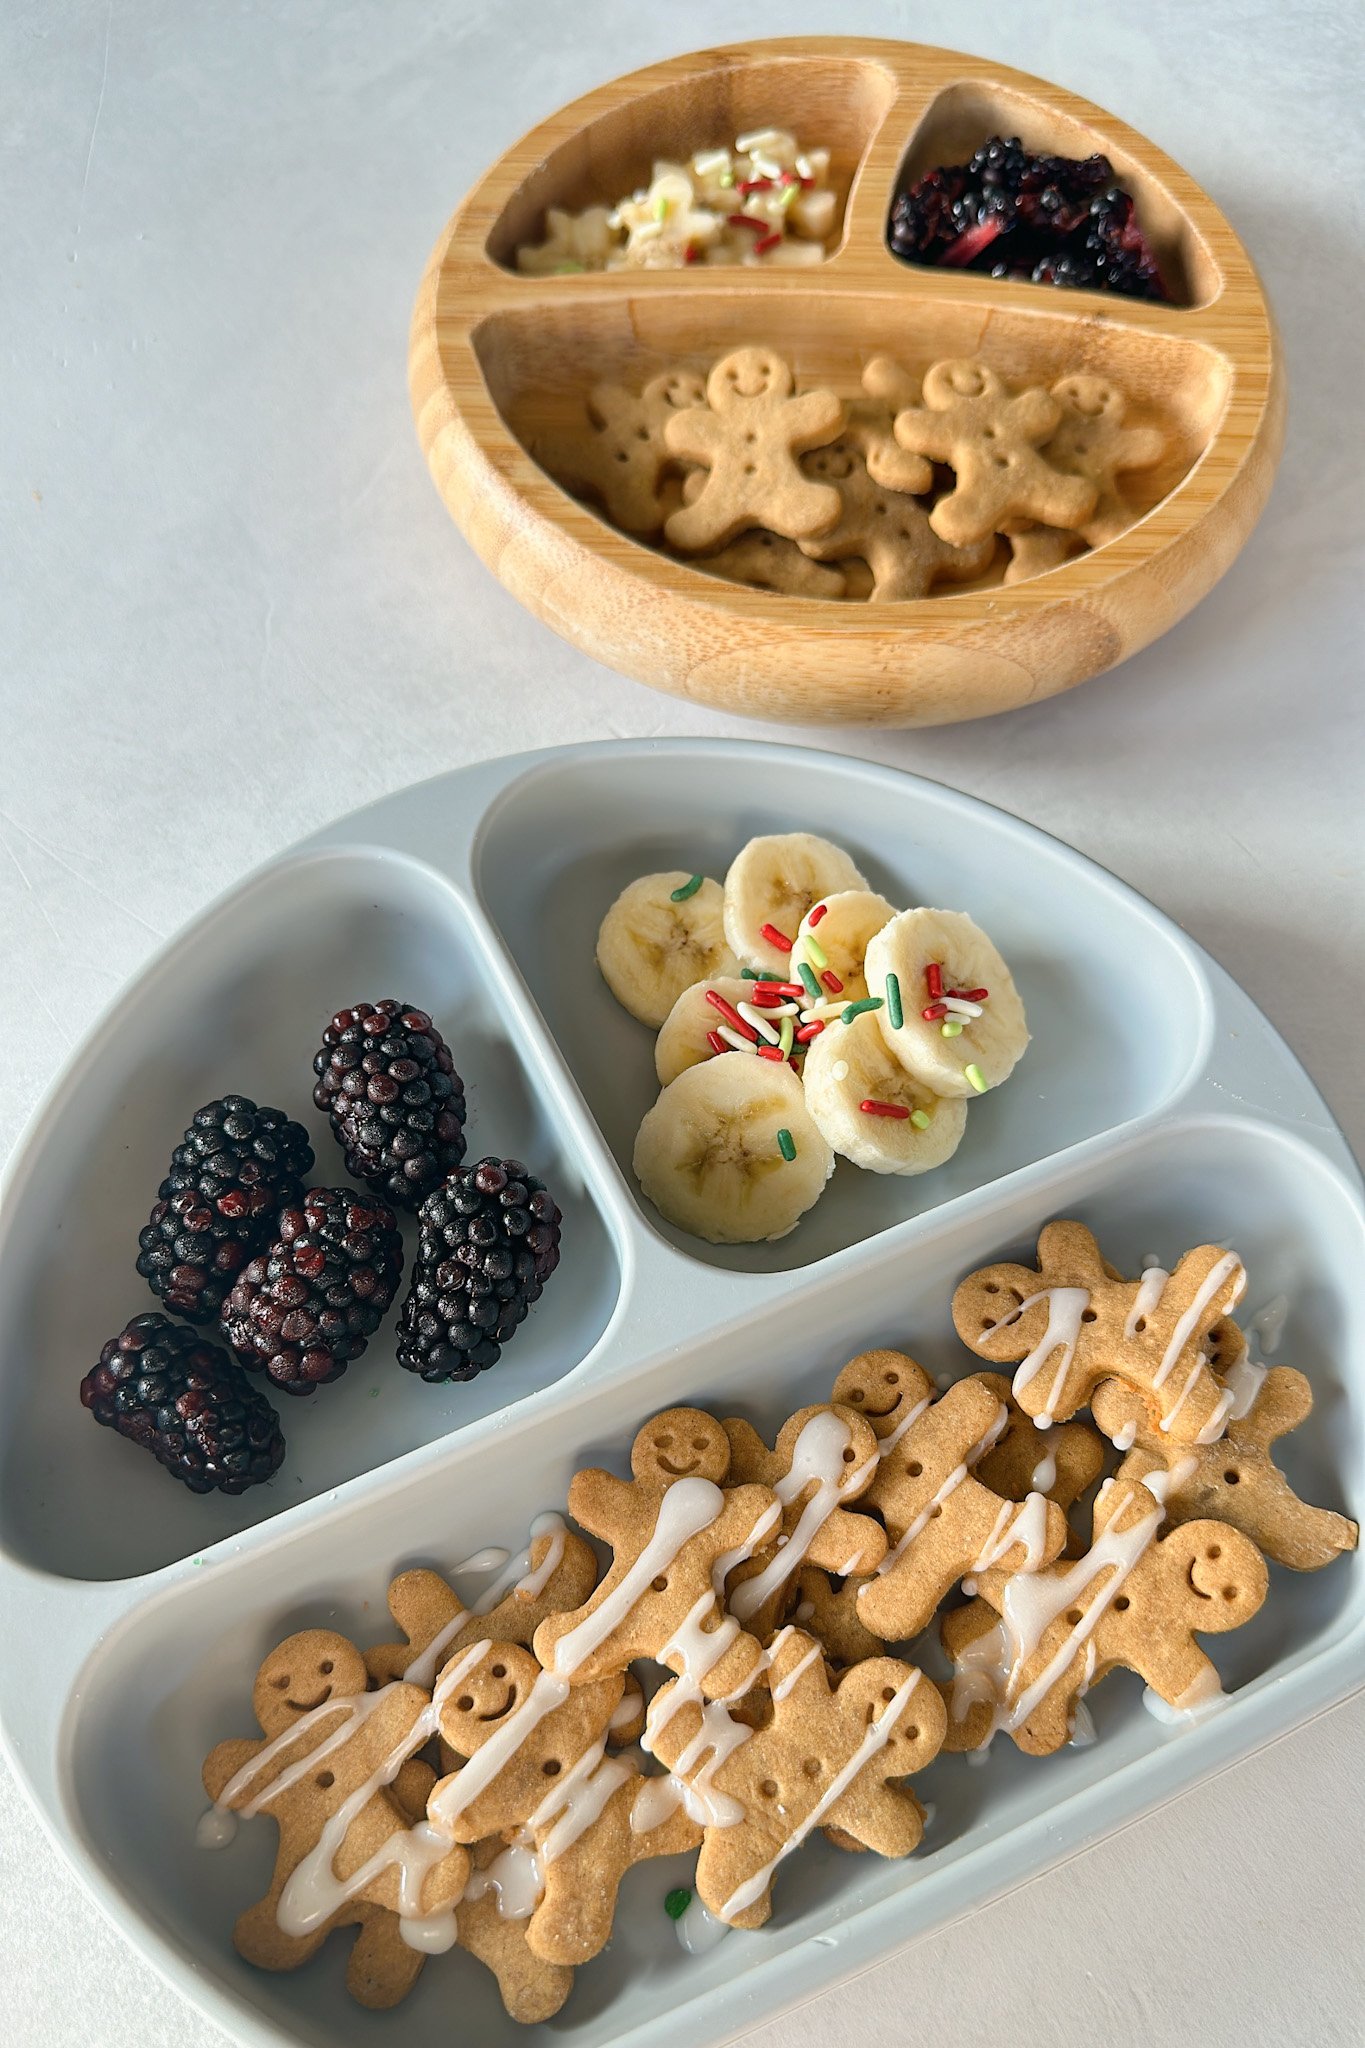 Mini gingerbread cookies served with blackberries and bananas.